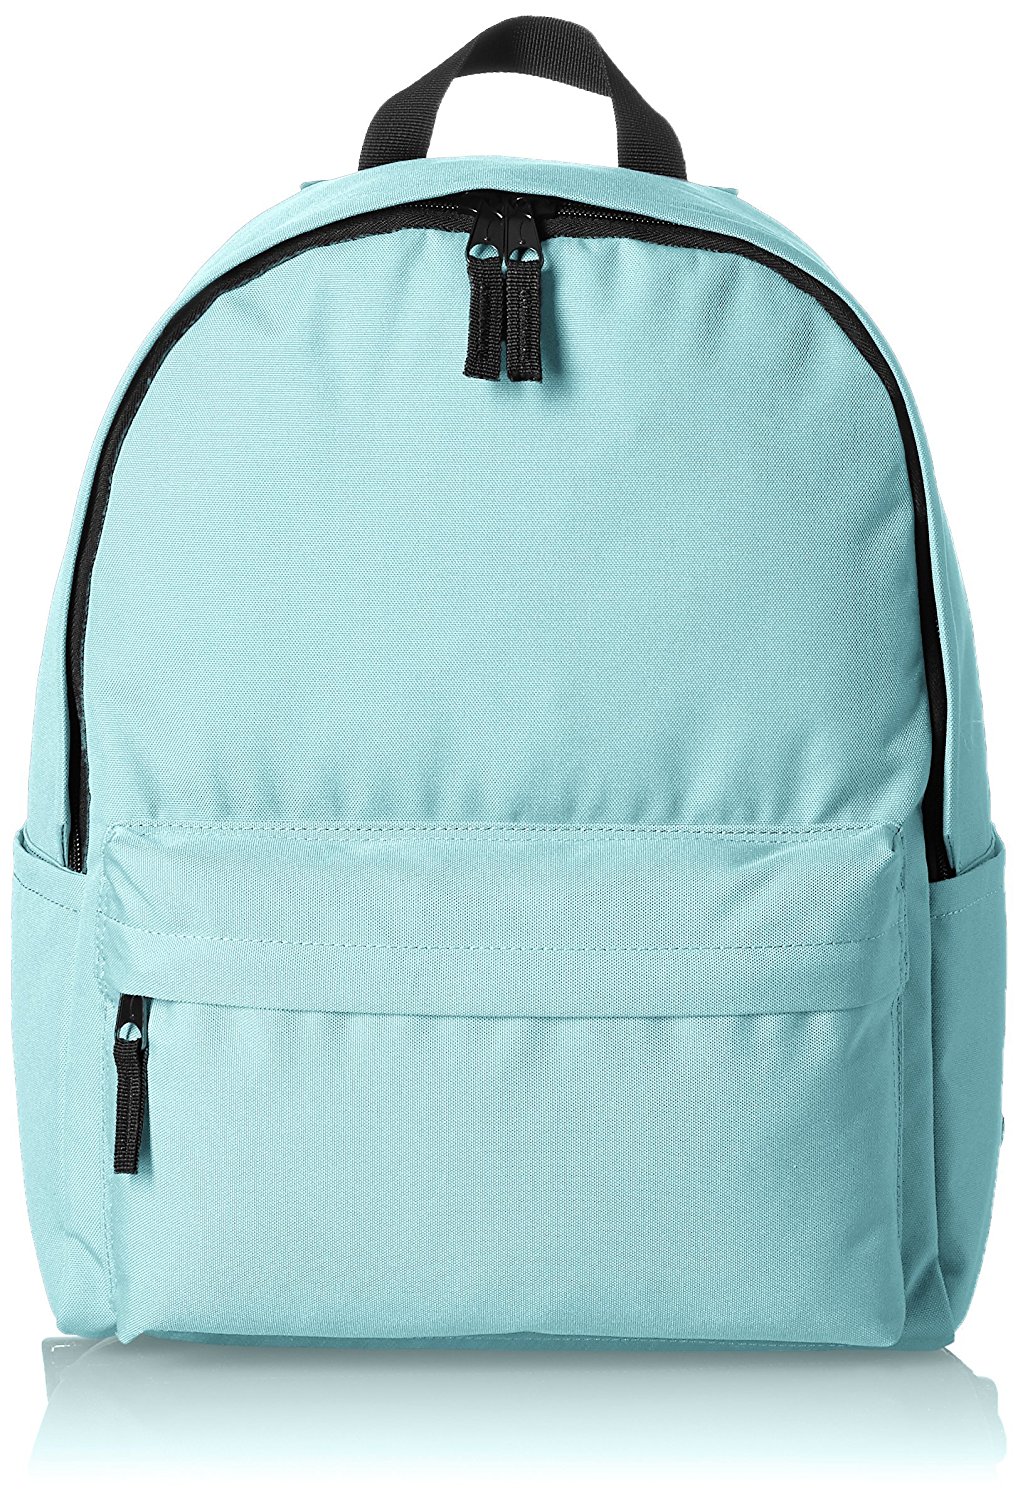 Top 10 Best School Bags For College and High School Students in 2020